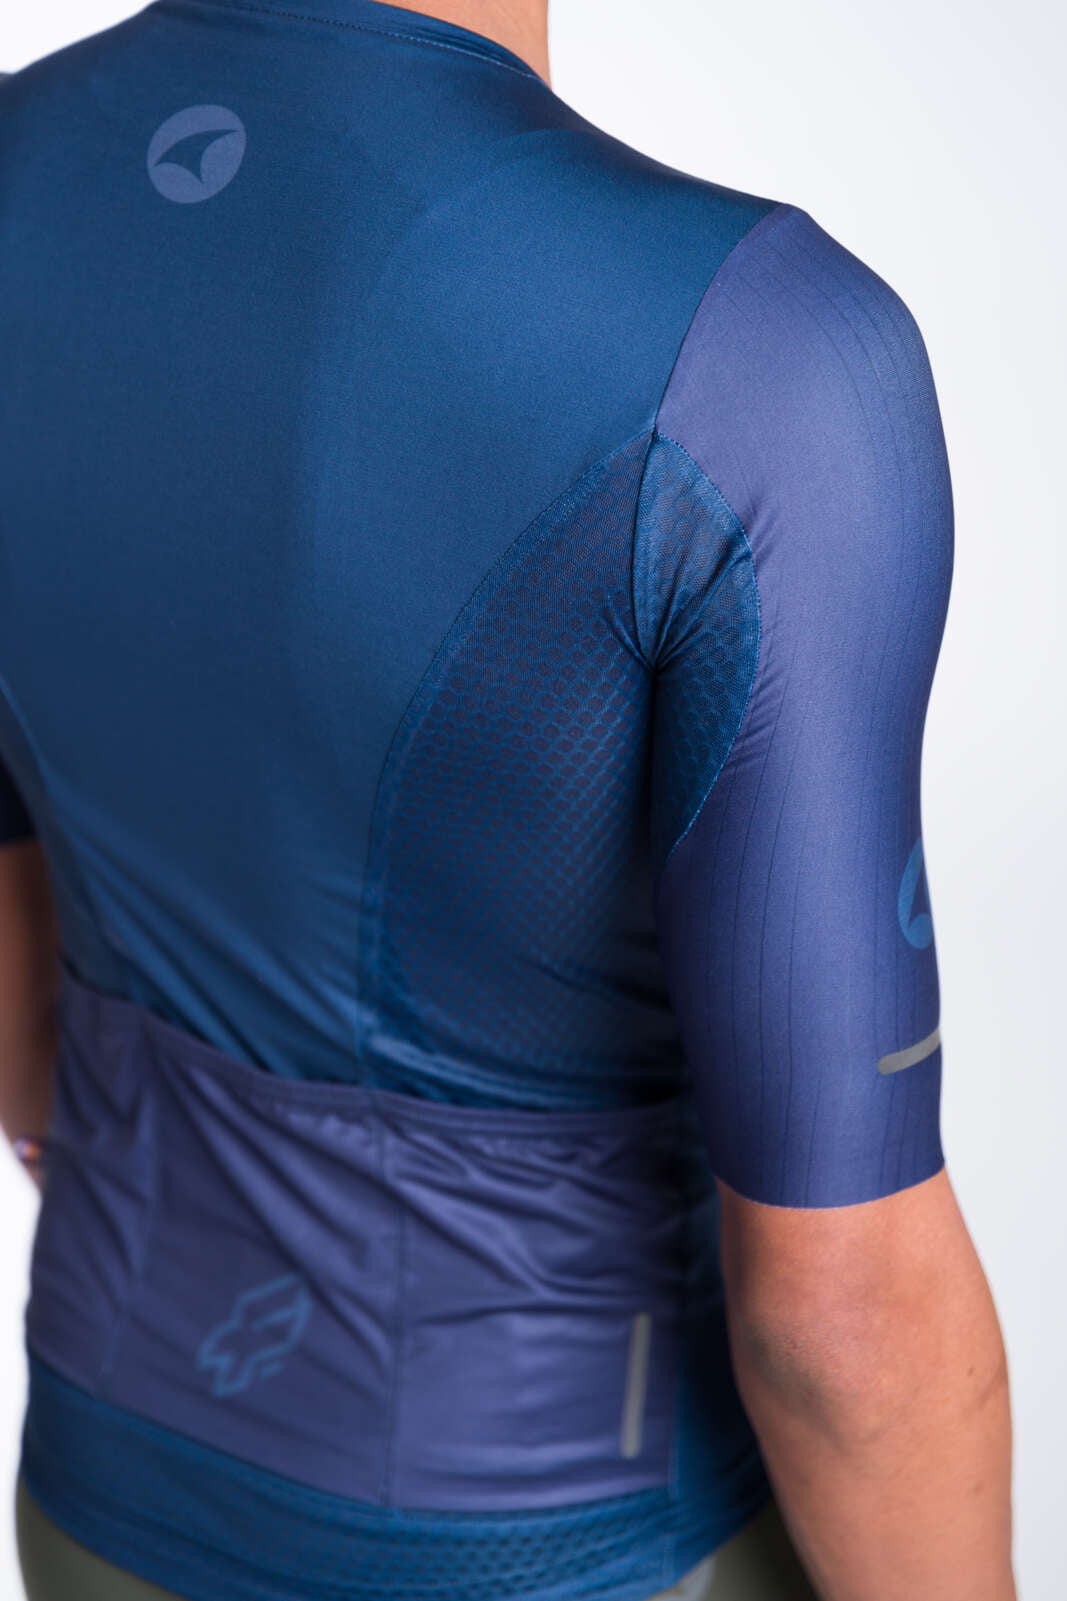 Men's Flyte Cycling Jersey - Close-up of Fabric Panels